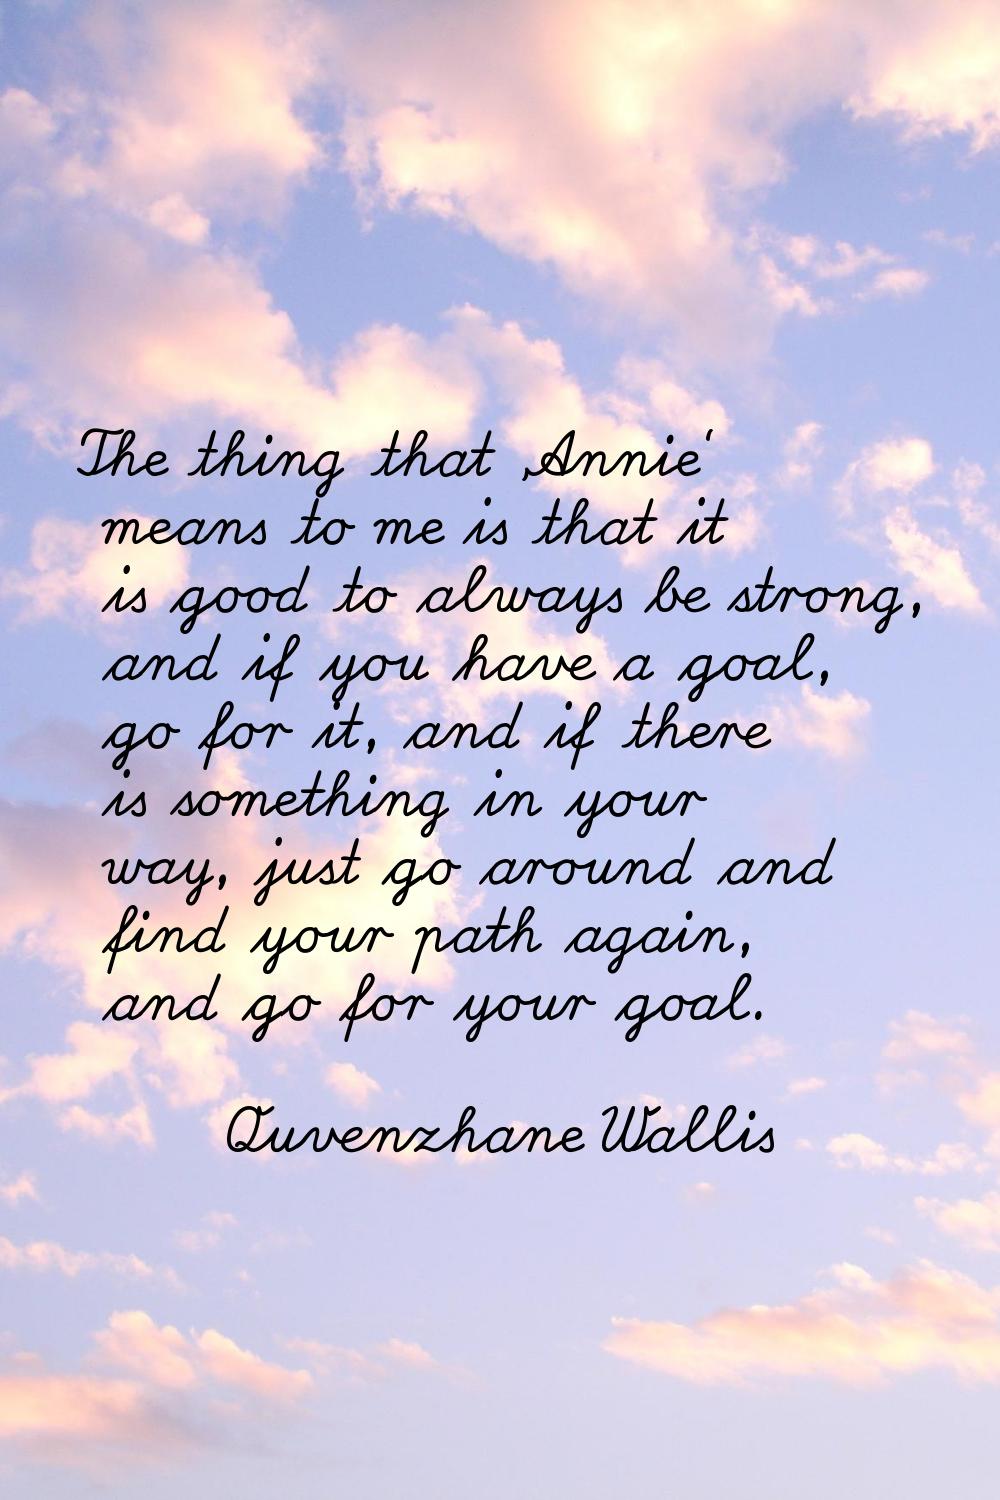 The thing that 'Annie' means to me is that it is good to always be strong, and if you have a goal, 